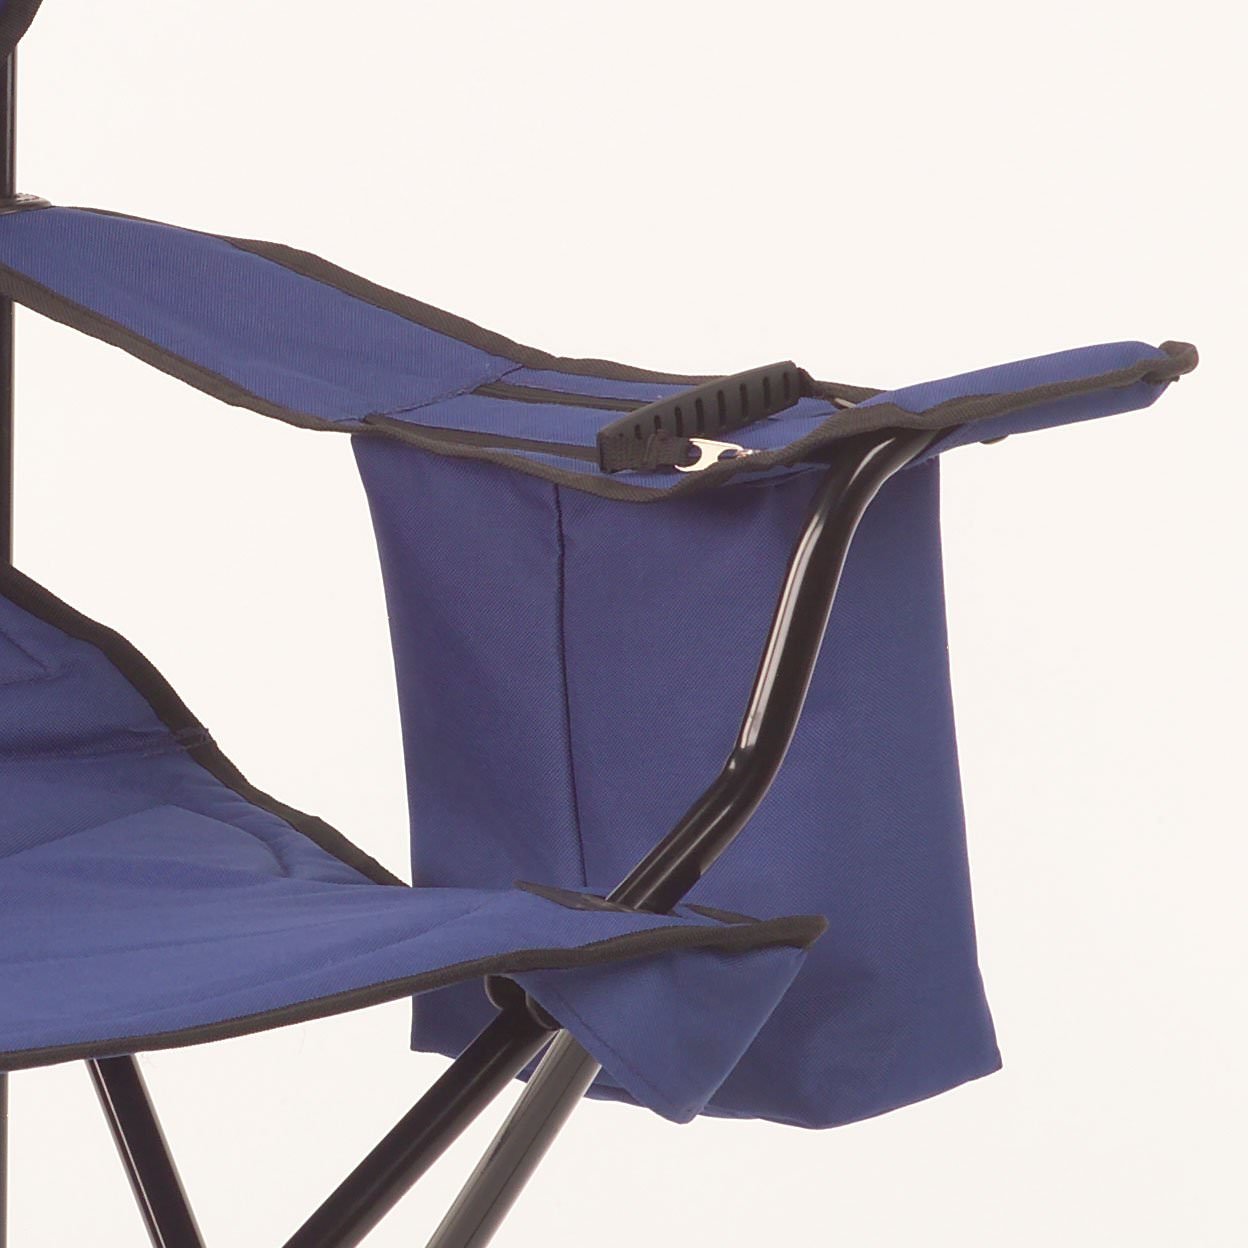 Coleman Adult Camping Chair with Built-In 4-Can Cooler, Blue - image 4 of 5